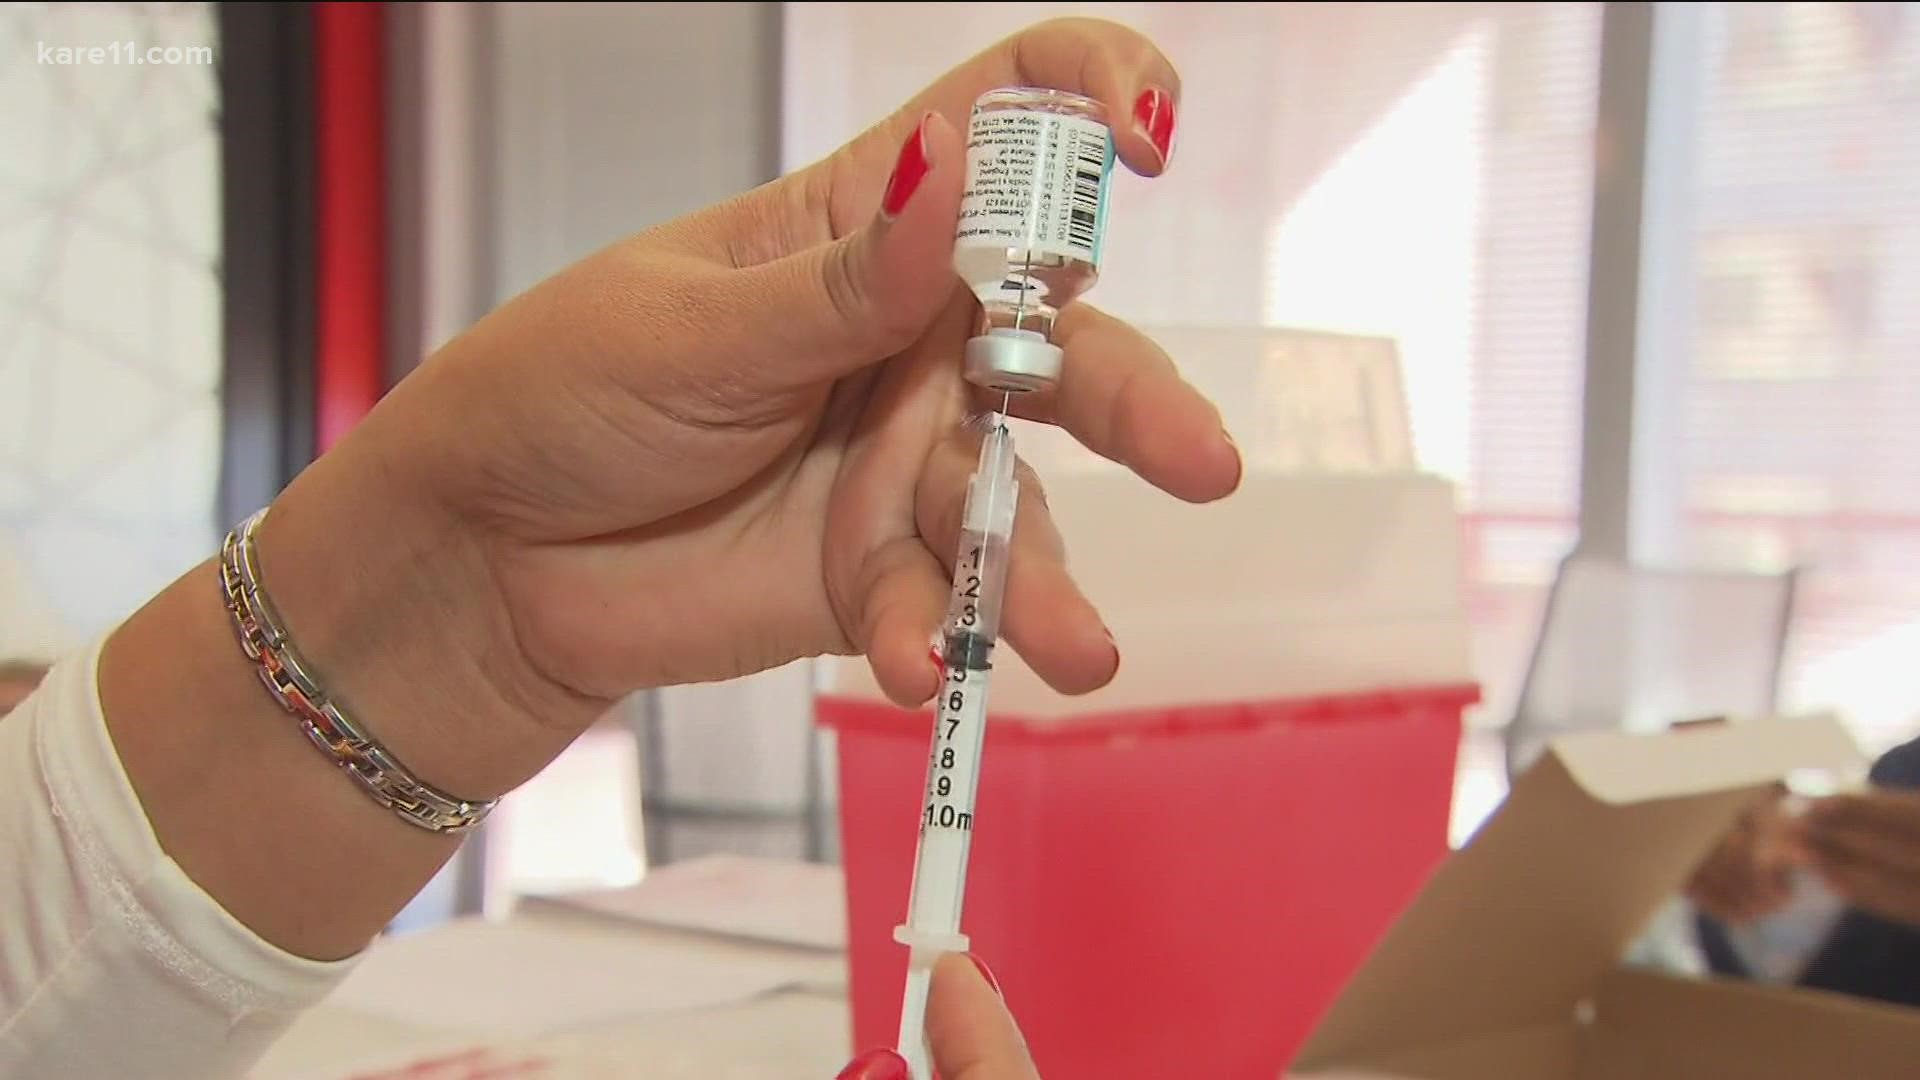 Officials say the state of Minnesota is preparing to expand COVID-19 vaccine booster shot eligibility to all adults as soon as this week